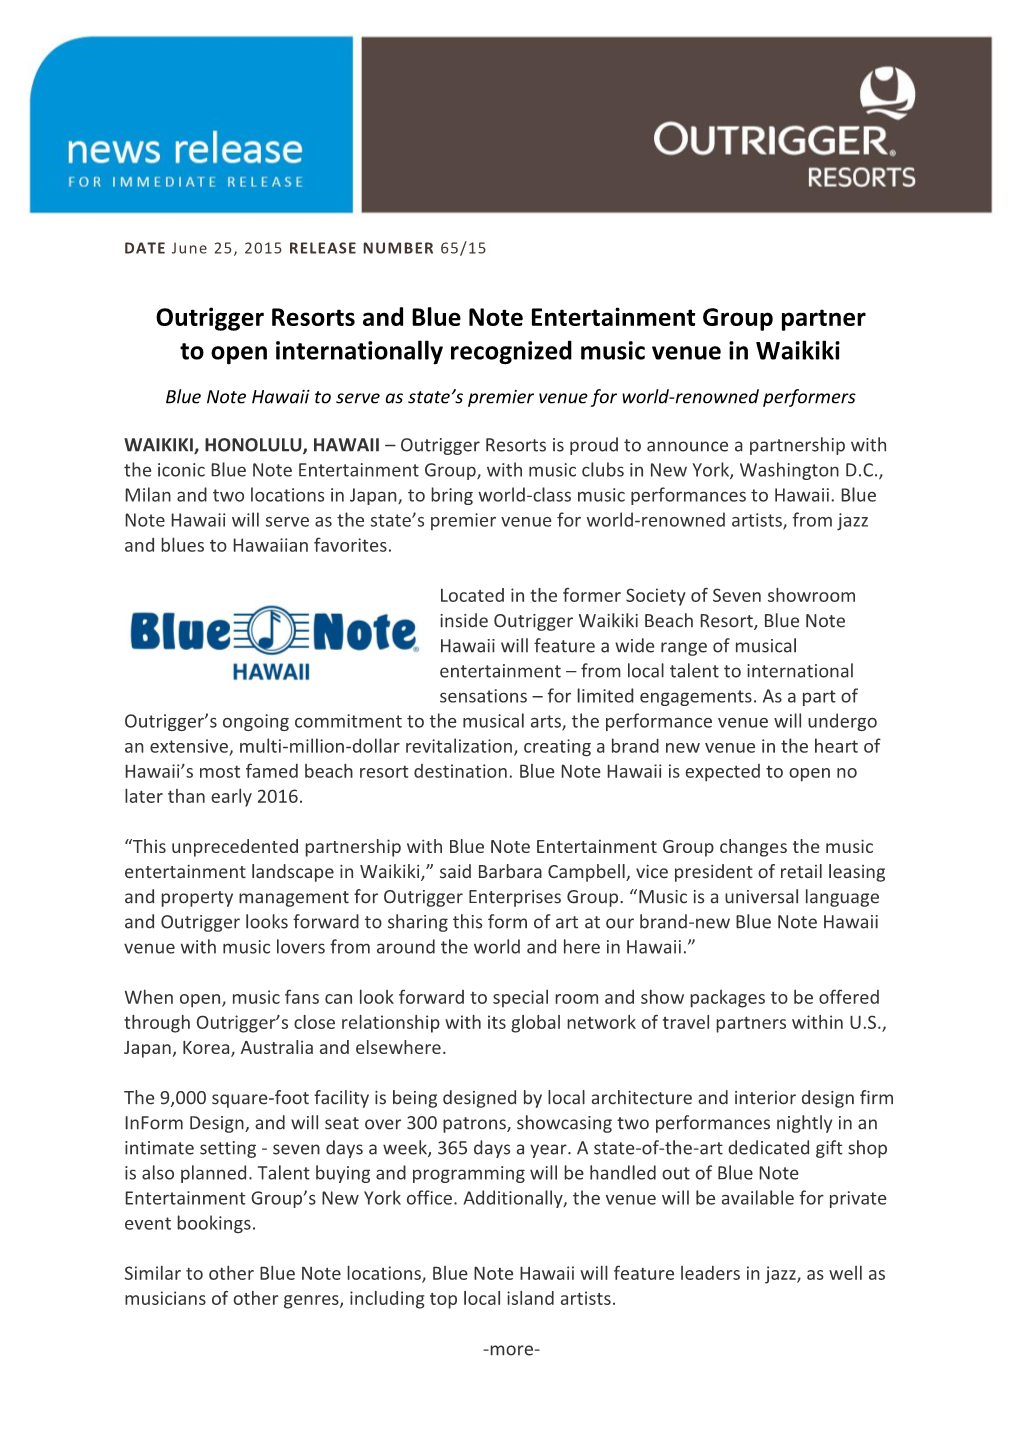 Outrigger Resorts and Blue Note Entertainment Group Partner to Open Internationally Recognized Music Venue in Waikiki